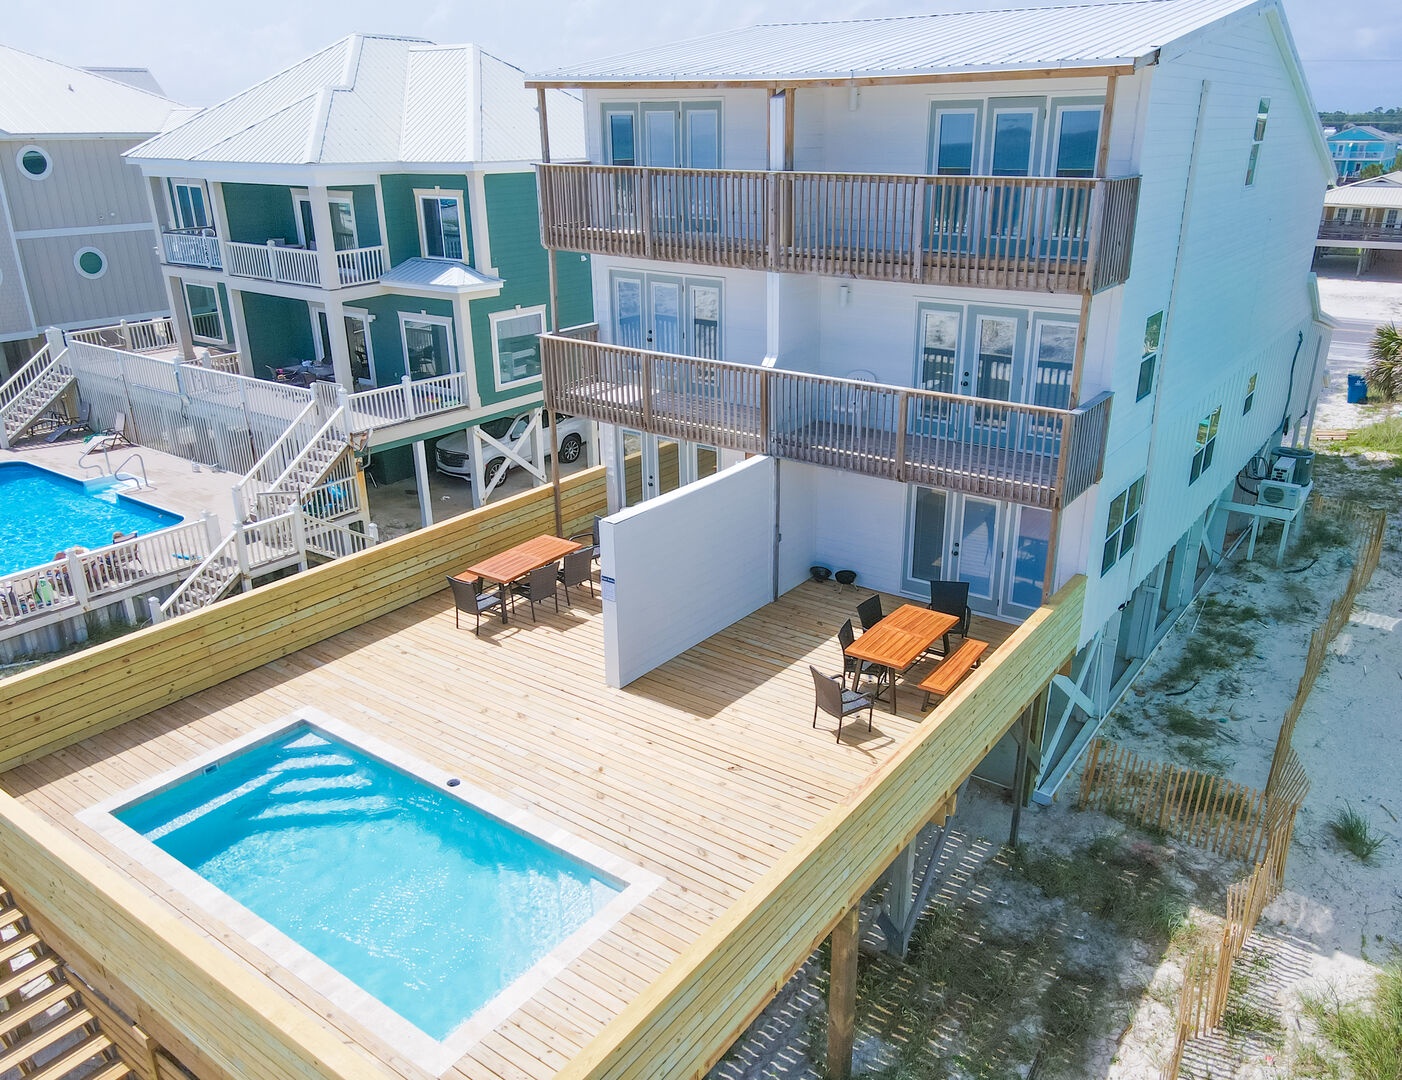 A License to Chill A is the east side of the duplex located on the beach in Gulf Shores